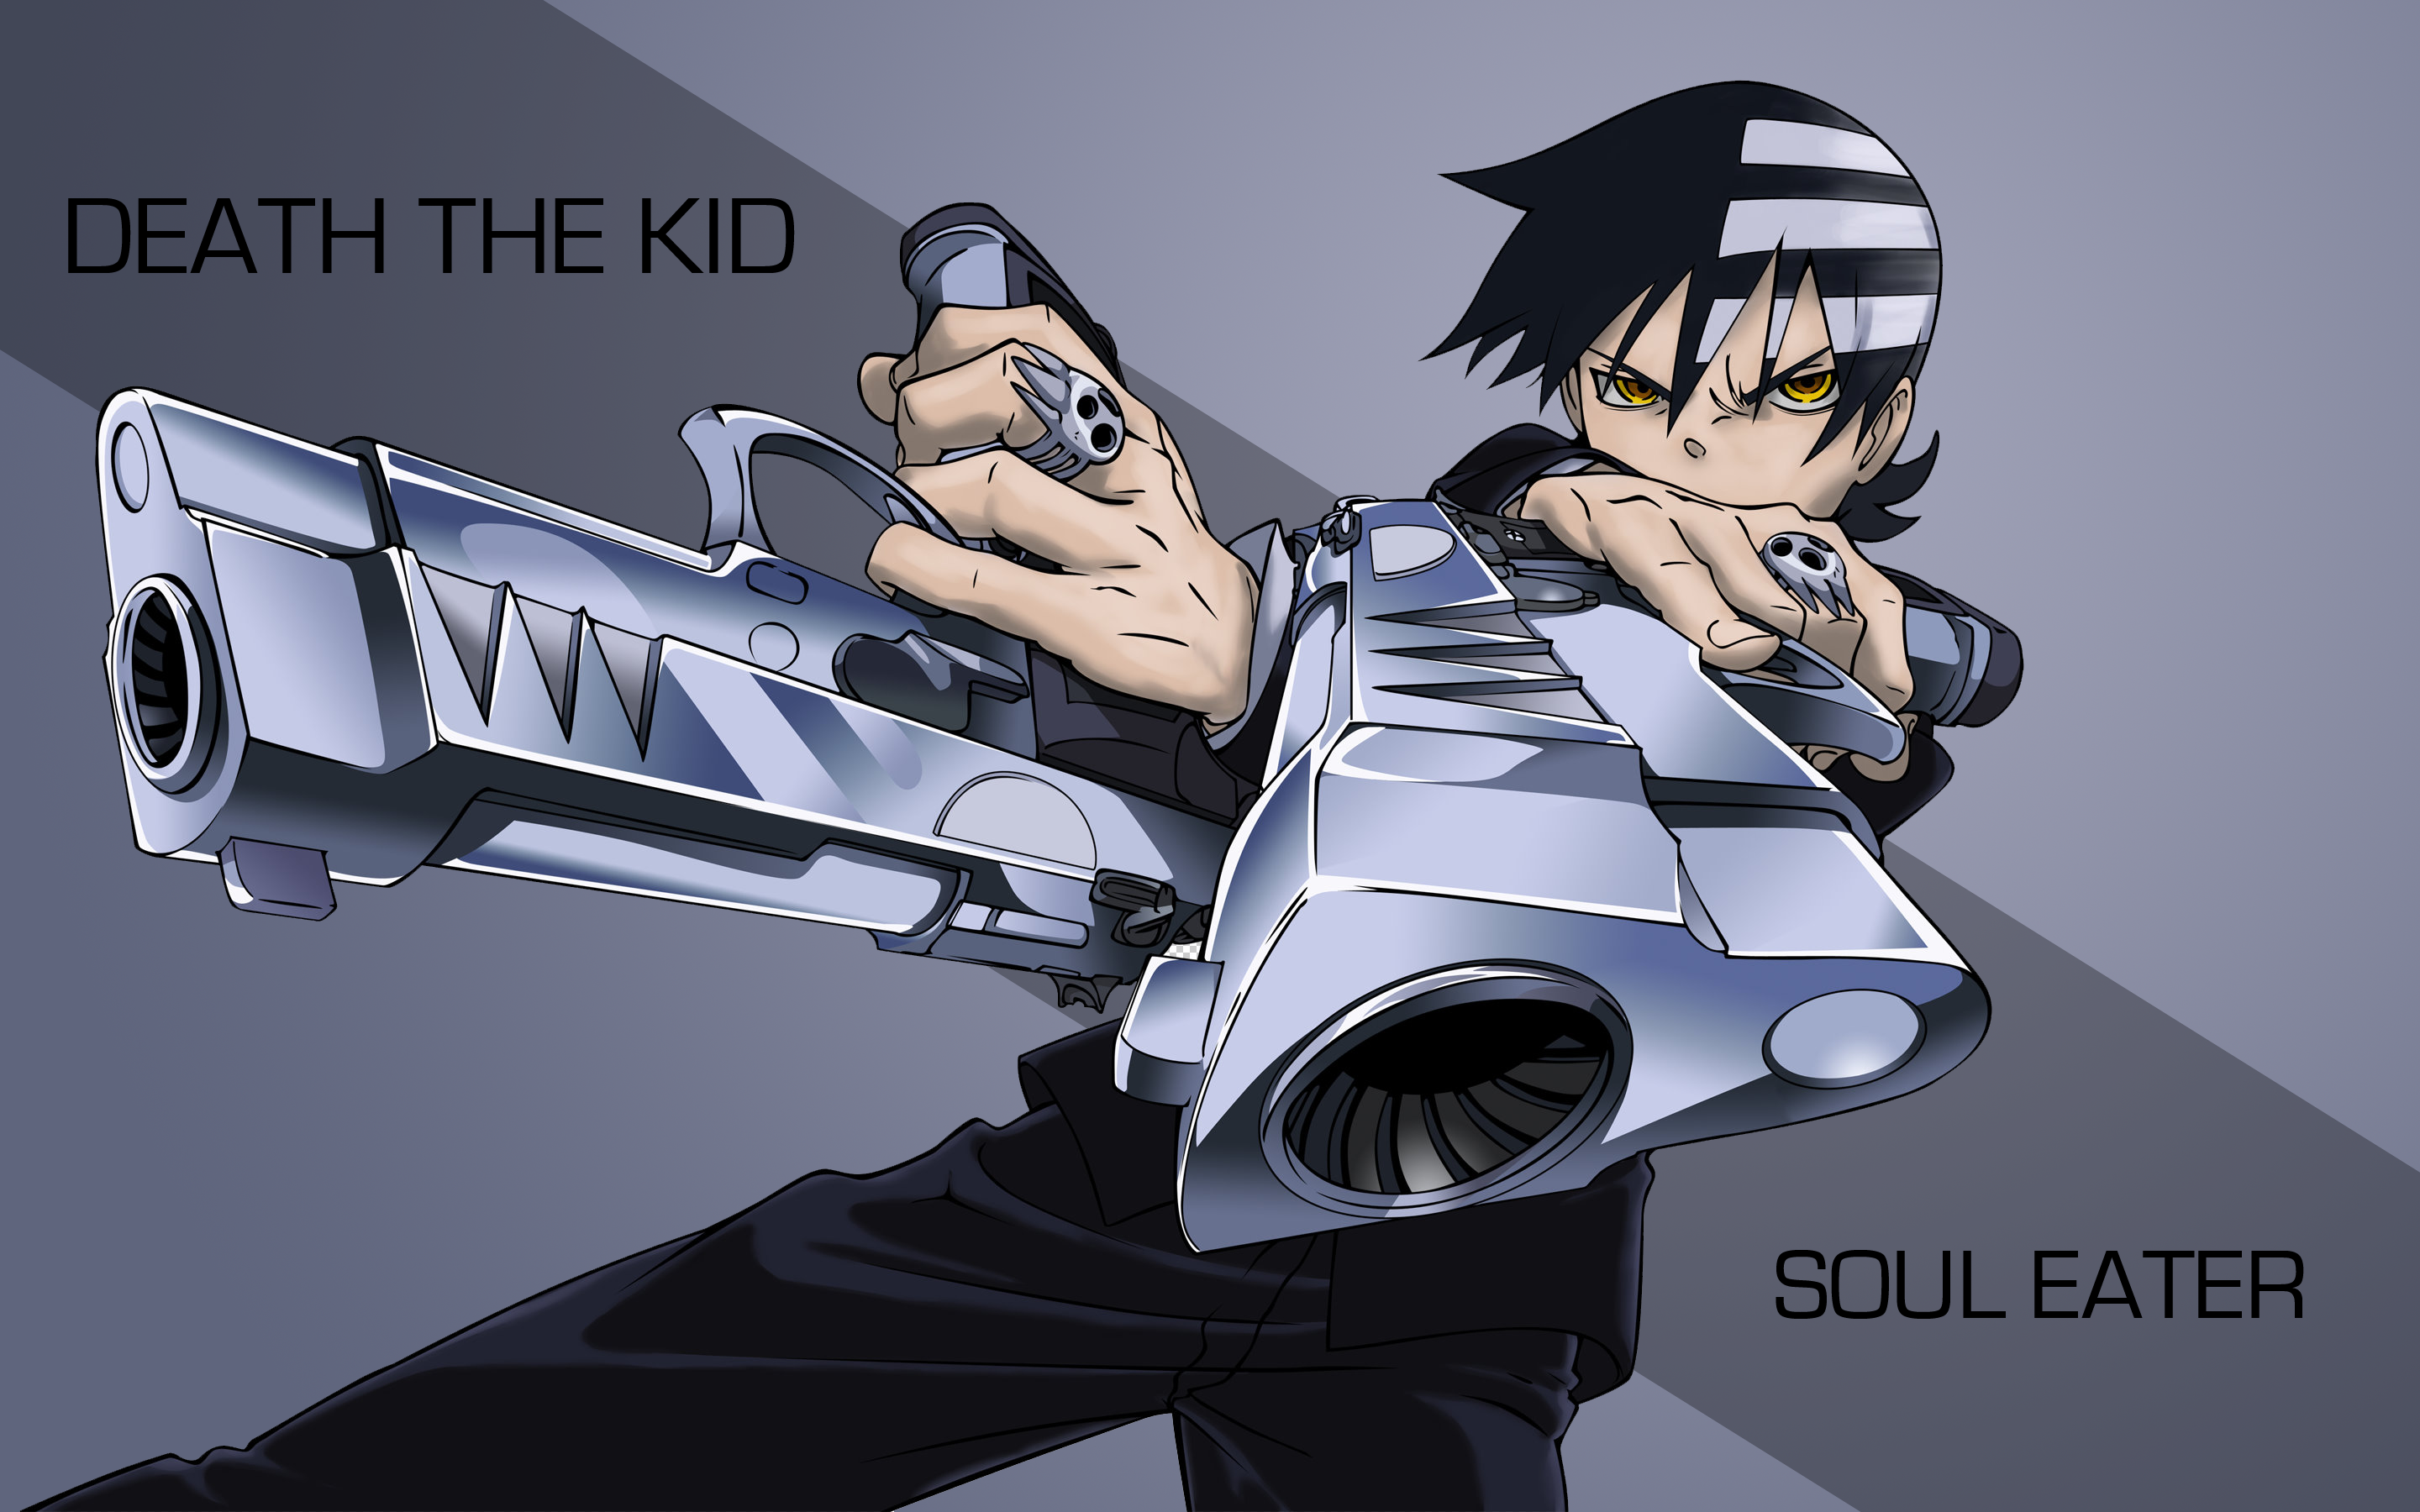 Anime 2880x1800 Soul Eater Death The Kid anime boys gun anime at gunpoint dual wield arms crossed angry